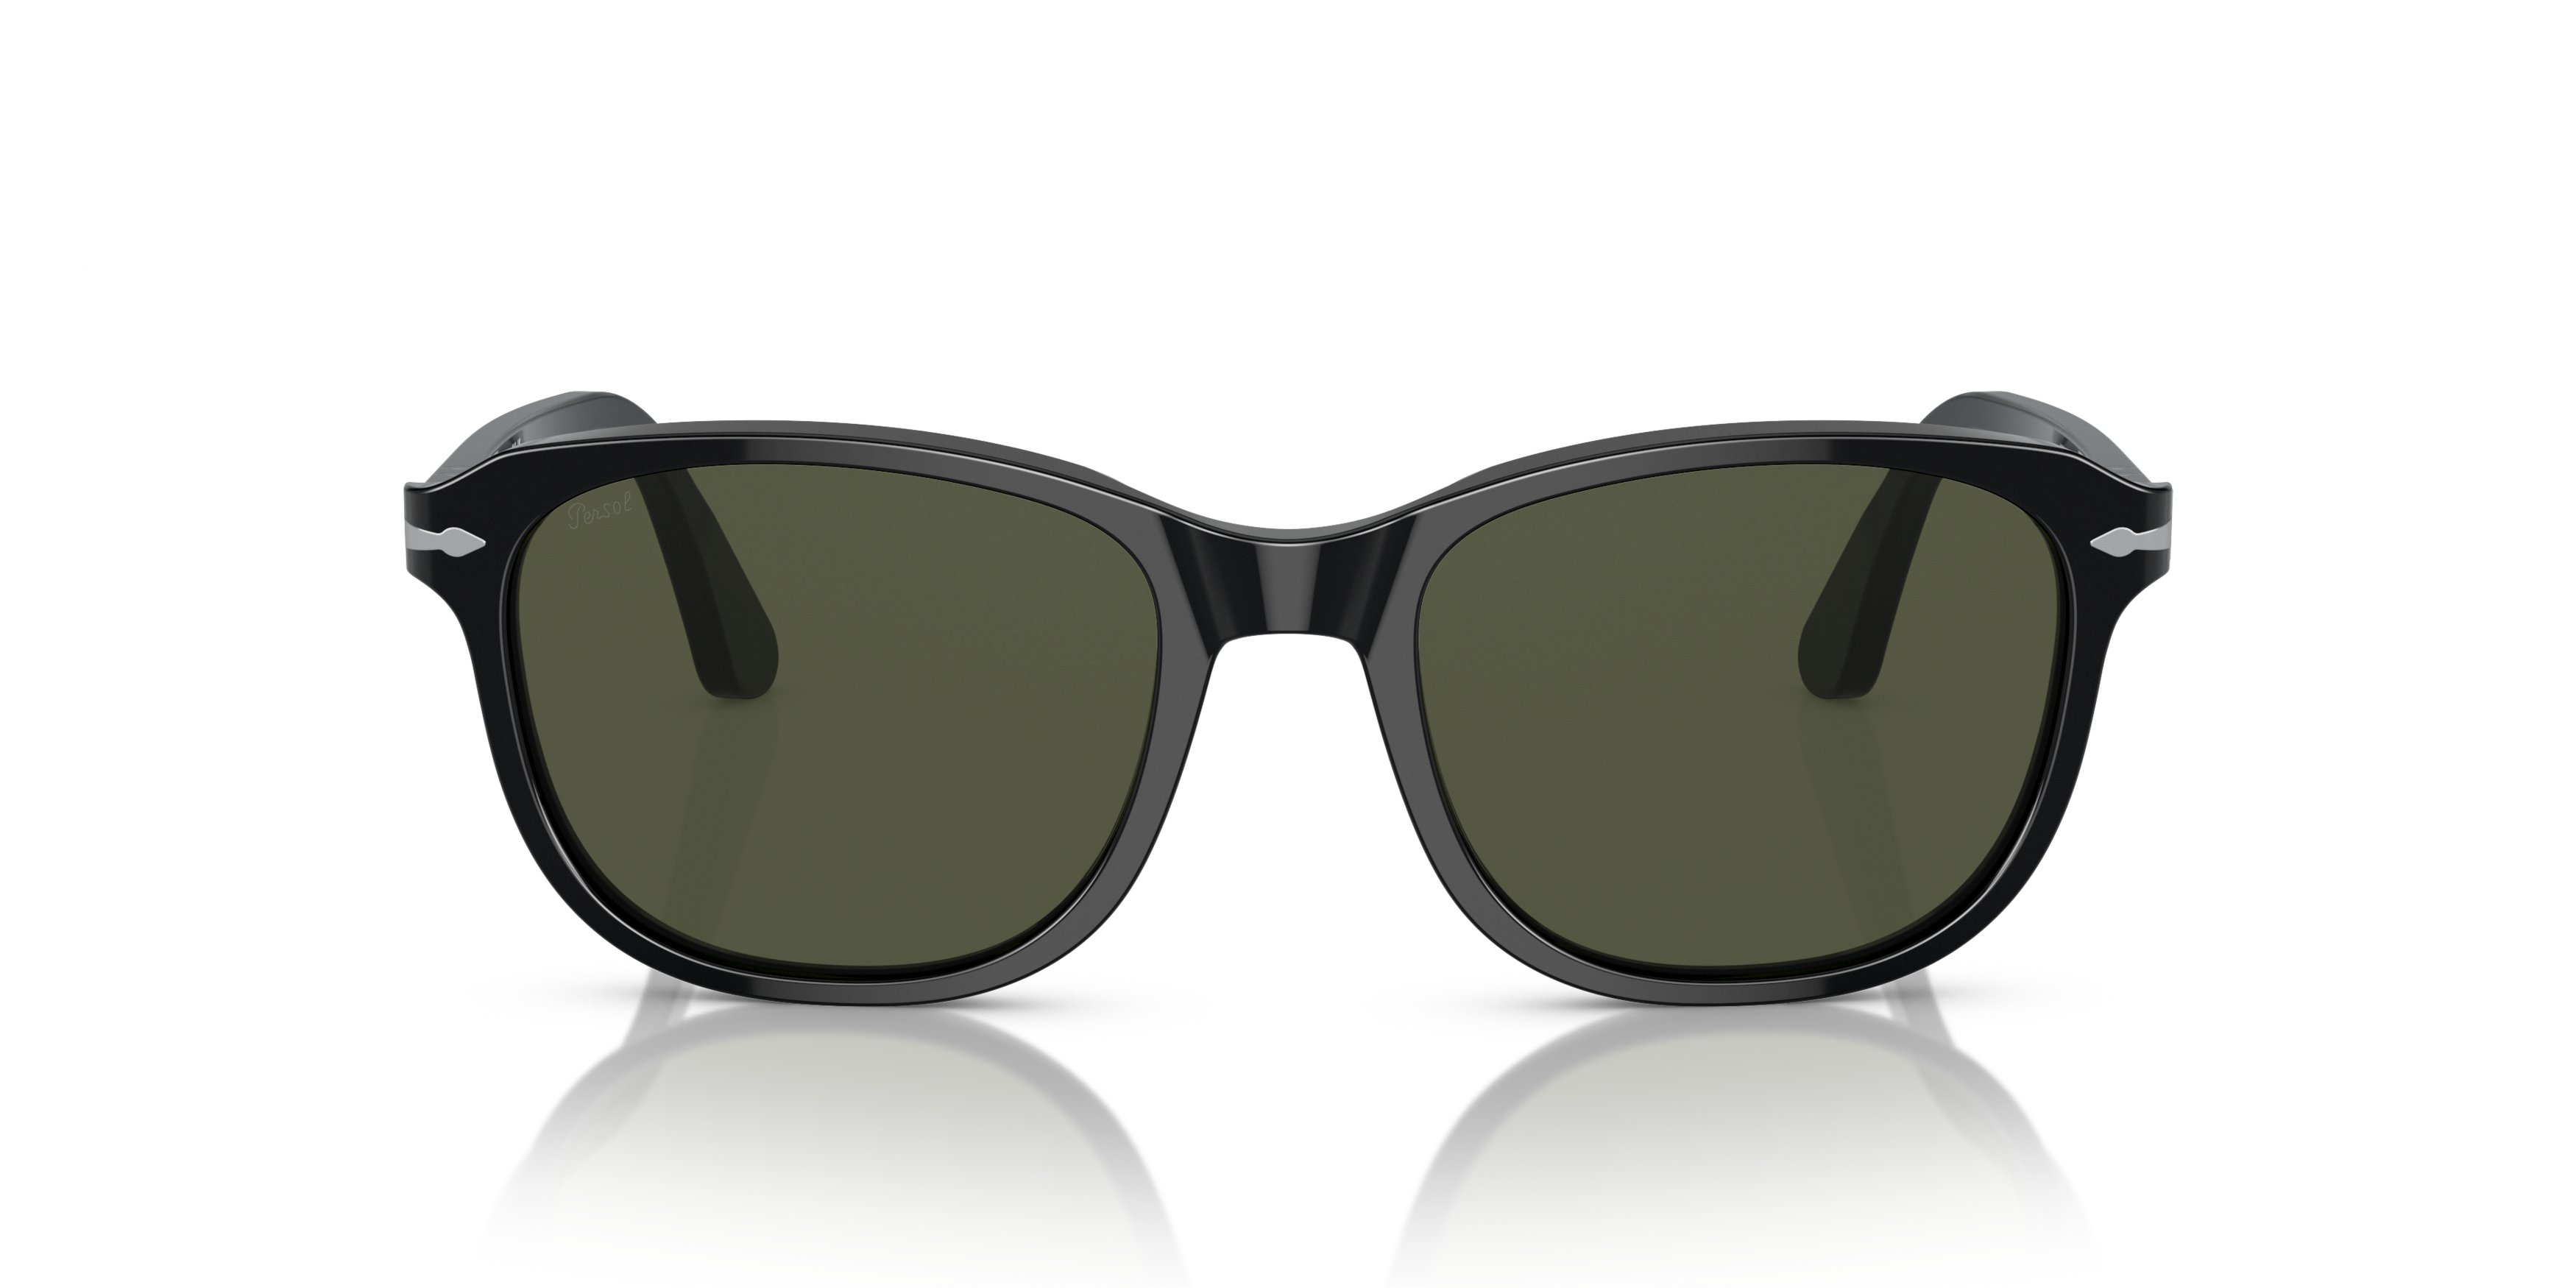 [products.image.front] PERSOL PO1935S 95/31